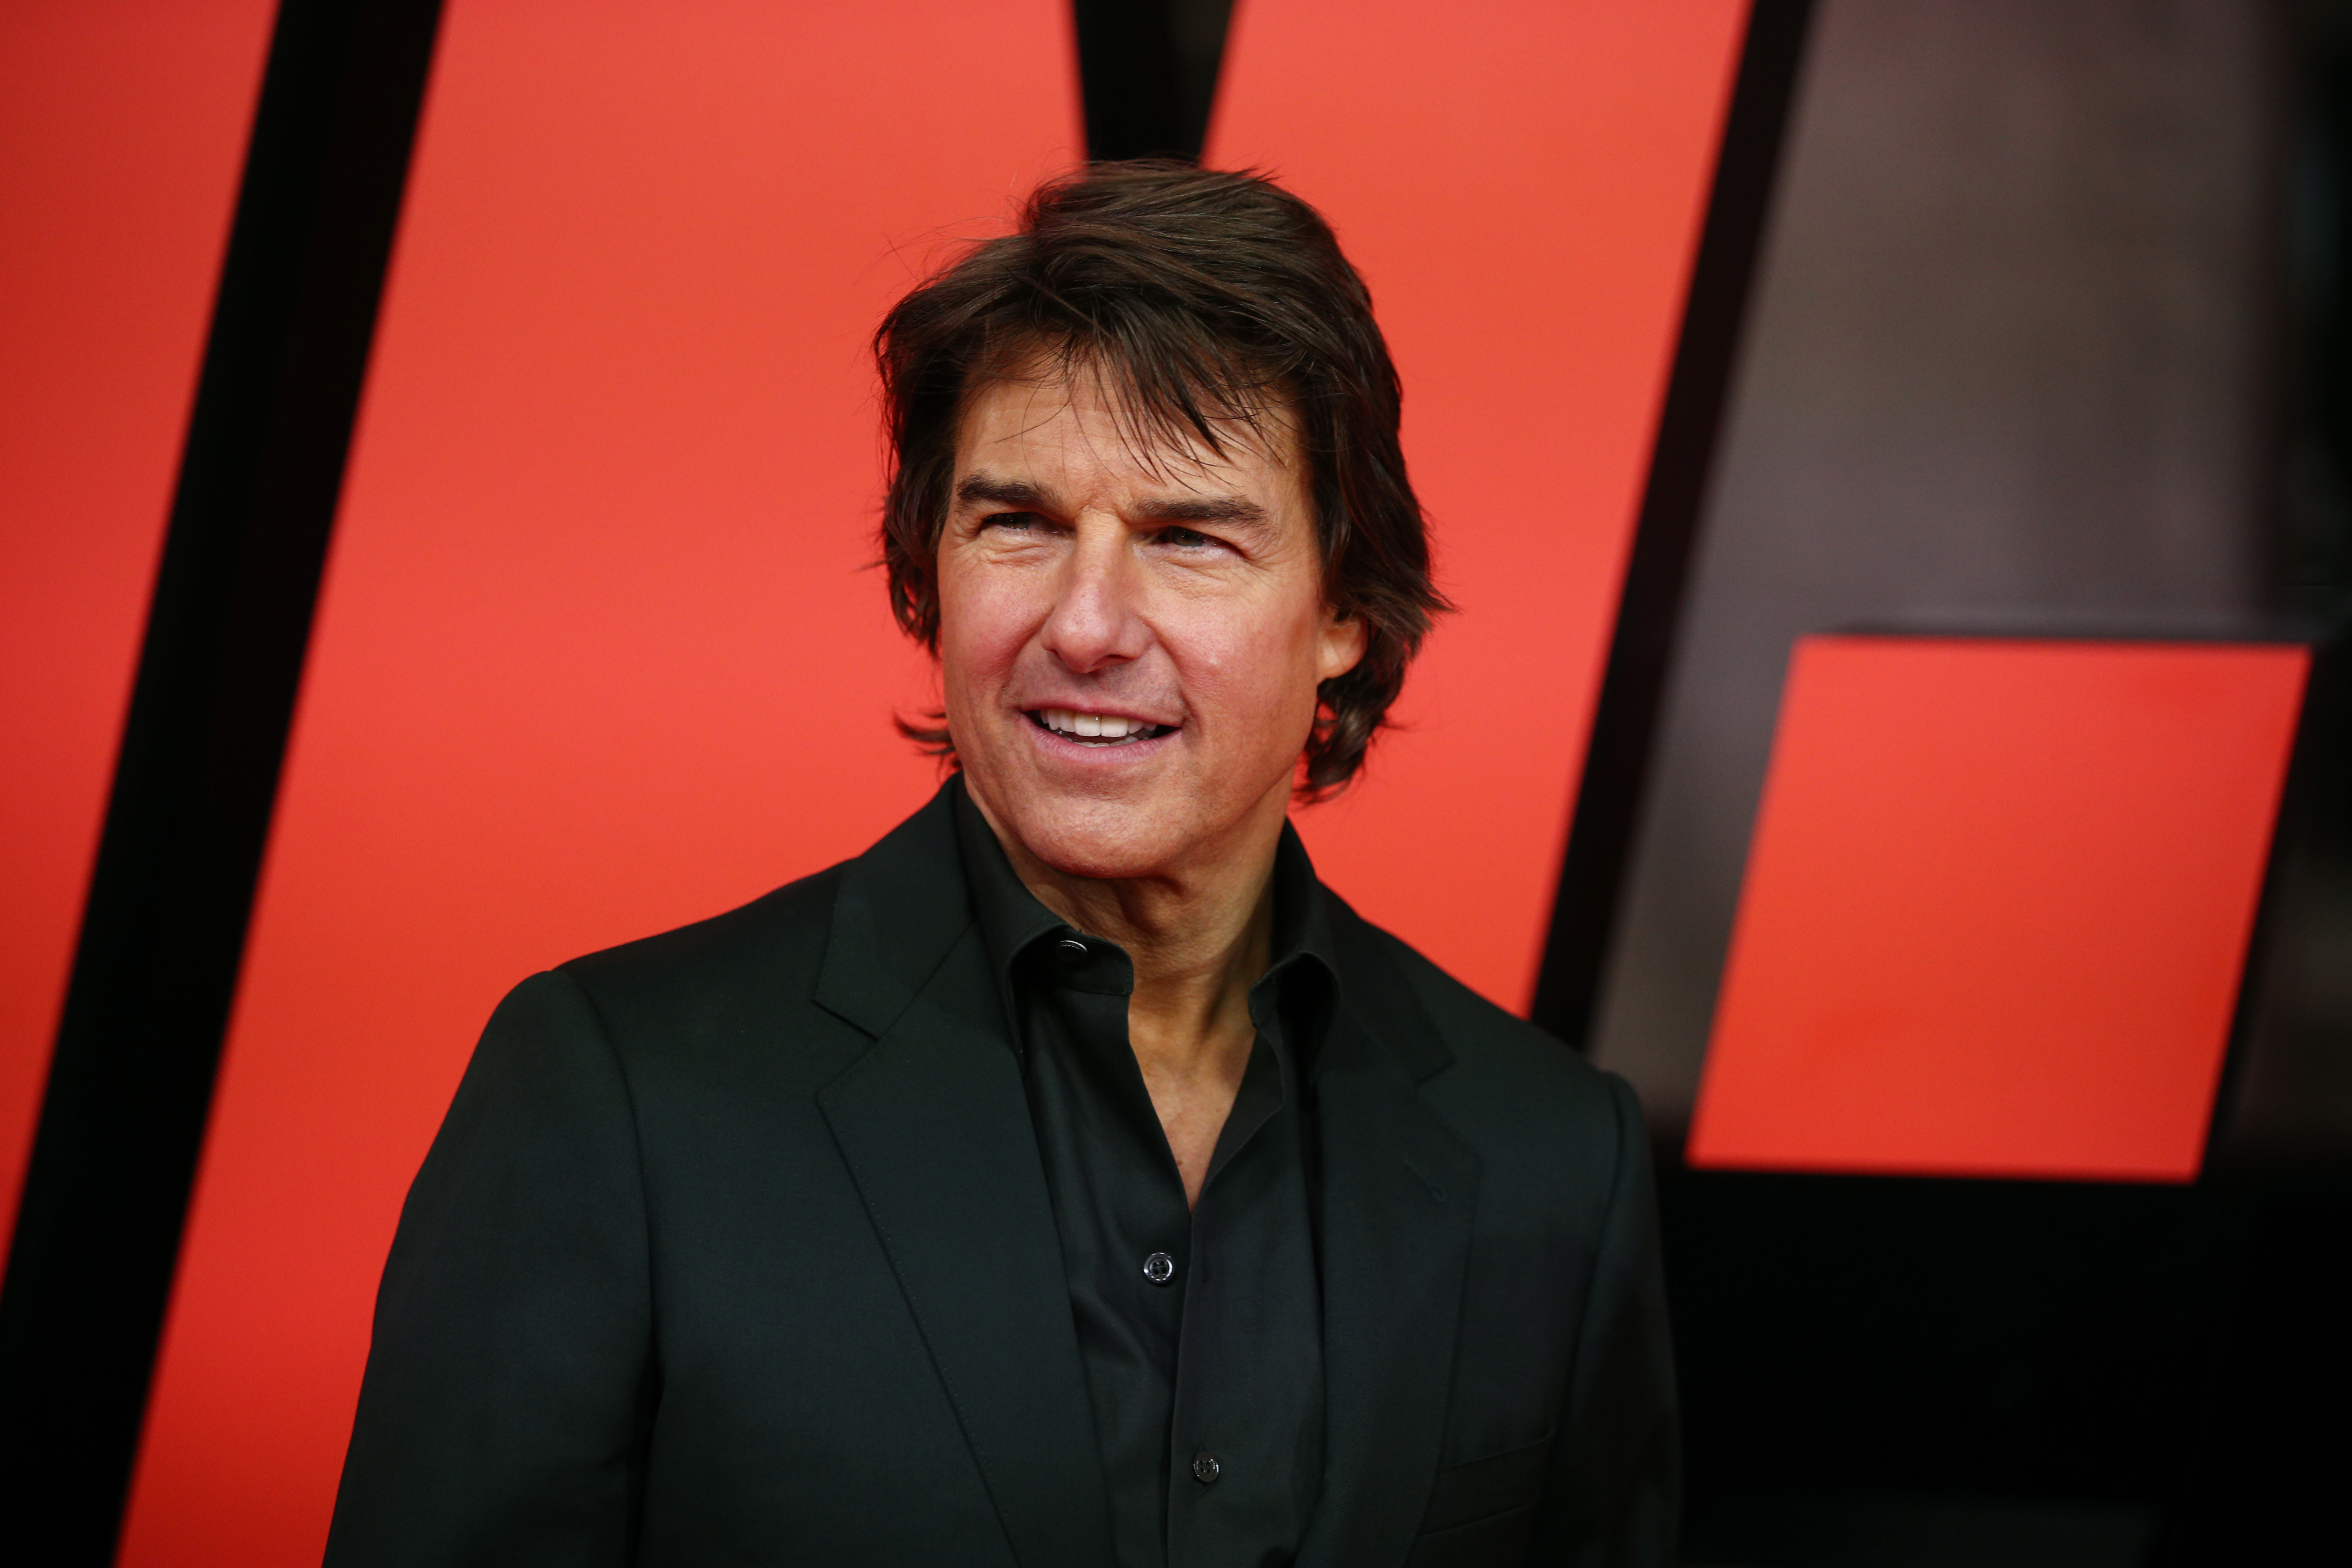 Tom Cruise attends the Australian premiere of "Mission: Impossible - Dead Reckoning Part One" on July 3, 2023, in Sydney, Australia. | Source: Getty Images